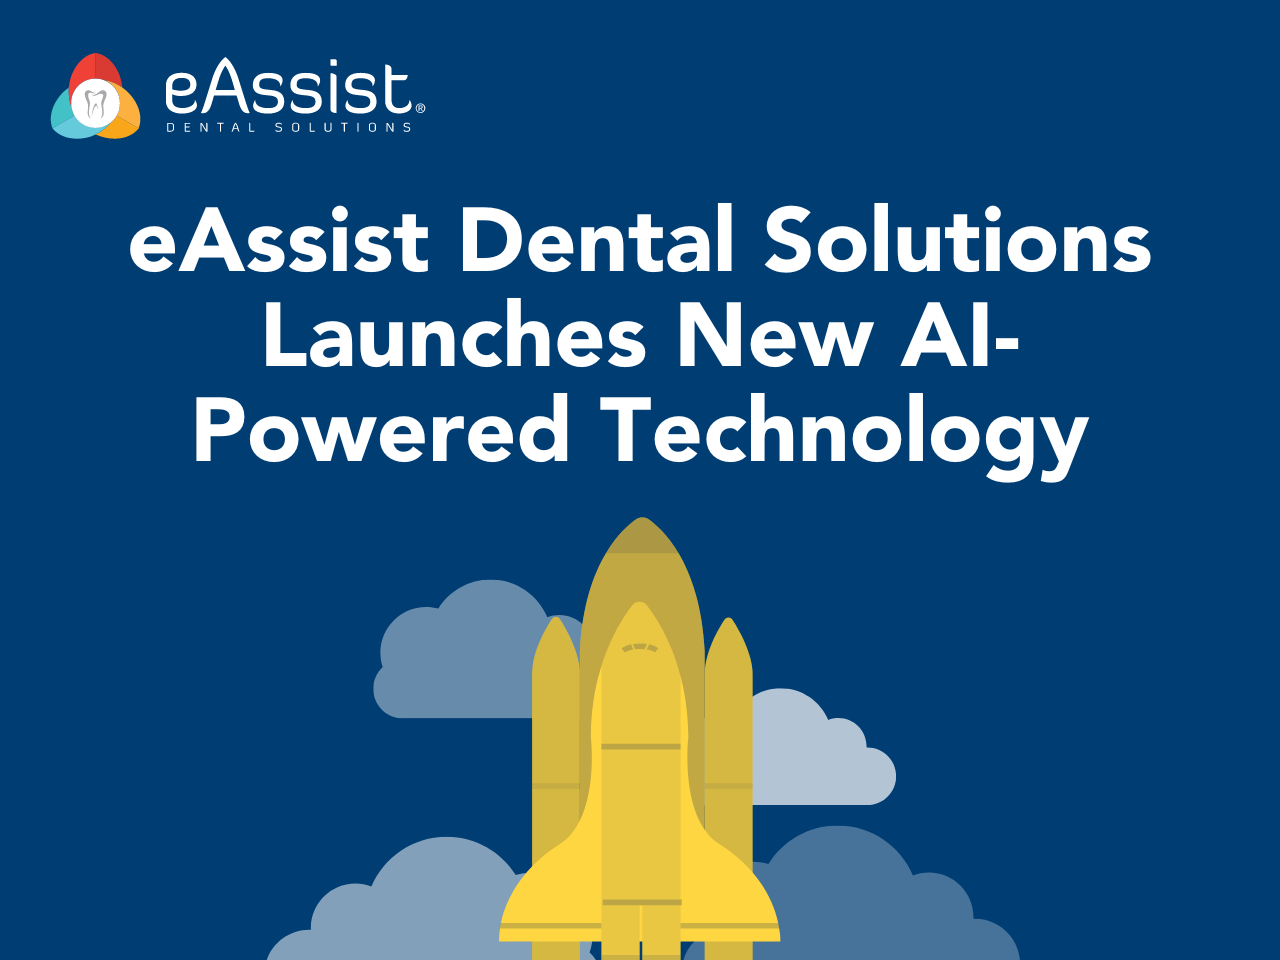 eAssist Dental Solutions Launches New AI Powered Technology